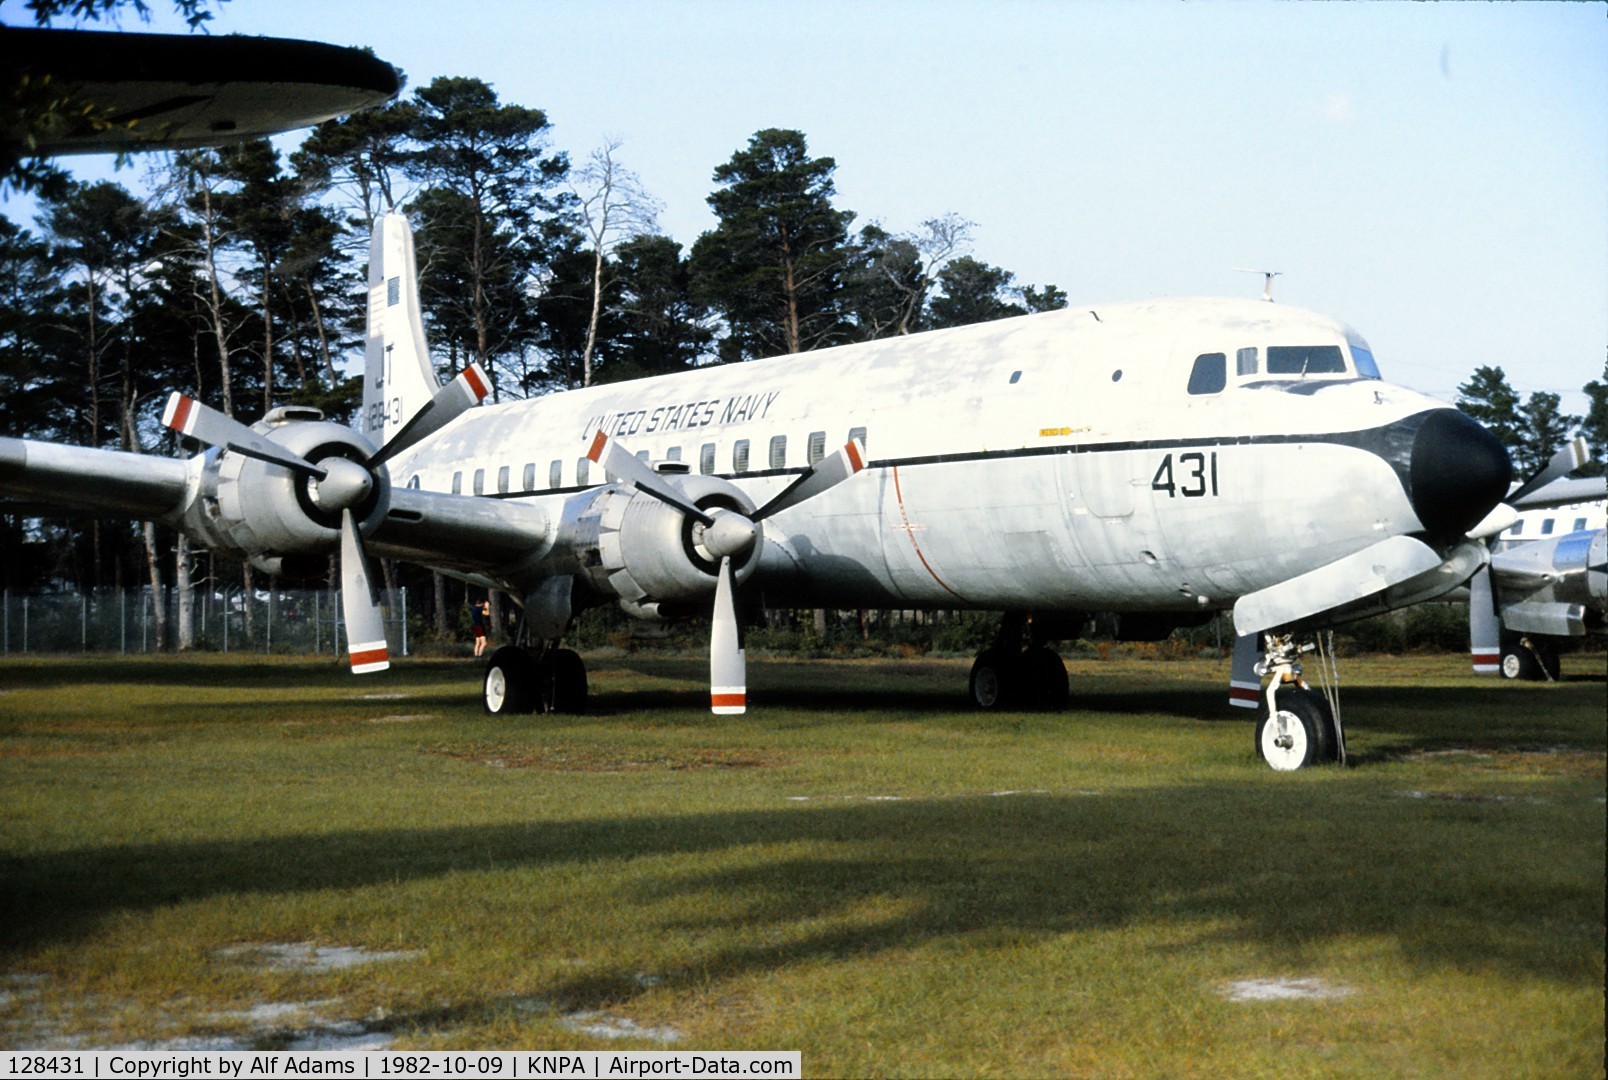 128431, 1952 Douglas VC-118B Liftmaster (R6D-1) C/N 43404, Displayed at the National Naval Aviation Museum, Pensacola, Florida in 1982.